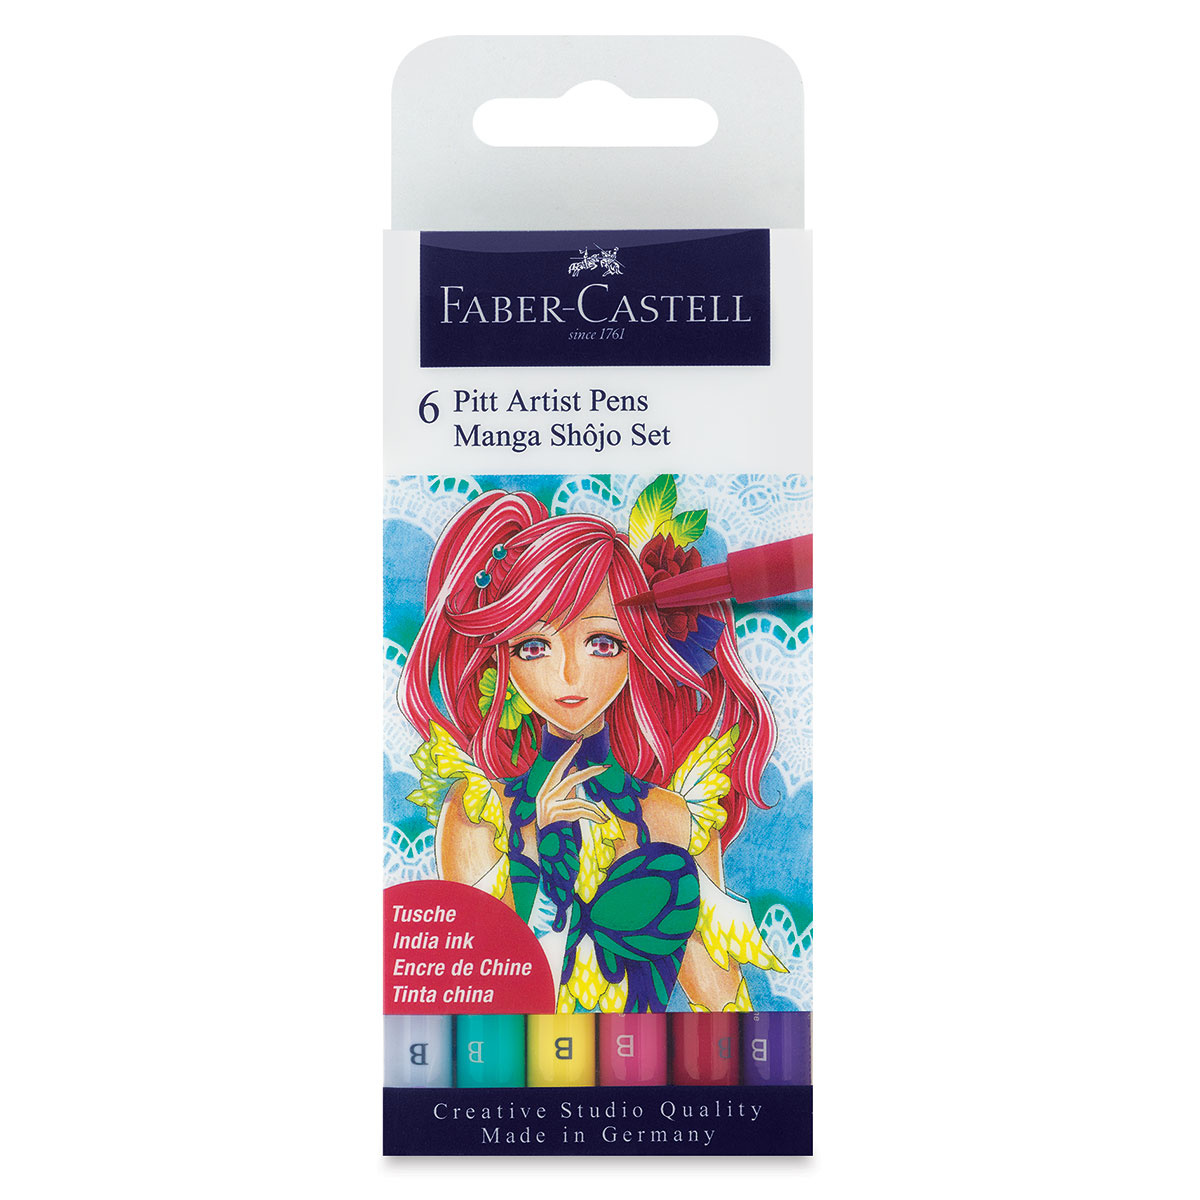 Faber Castell Manga Creative Studio - Getting Started:Complete